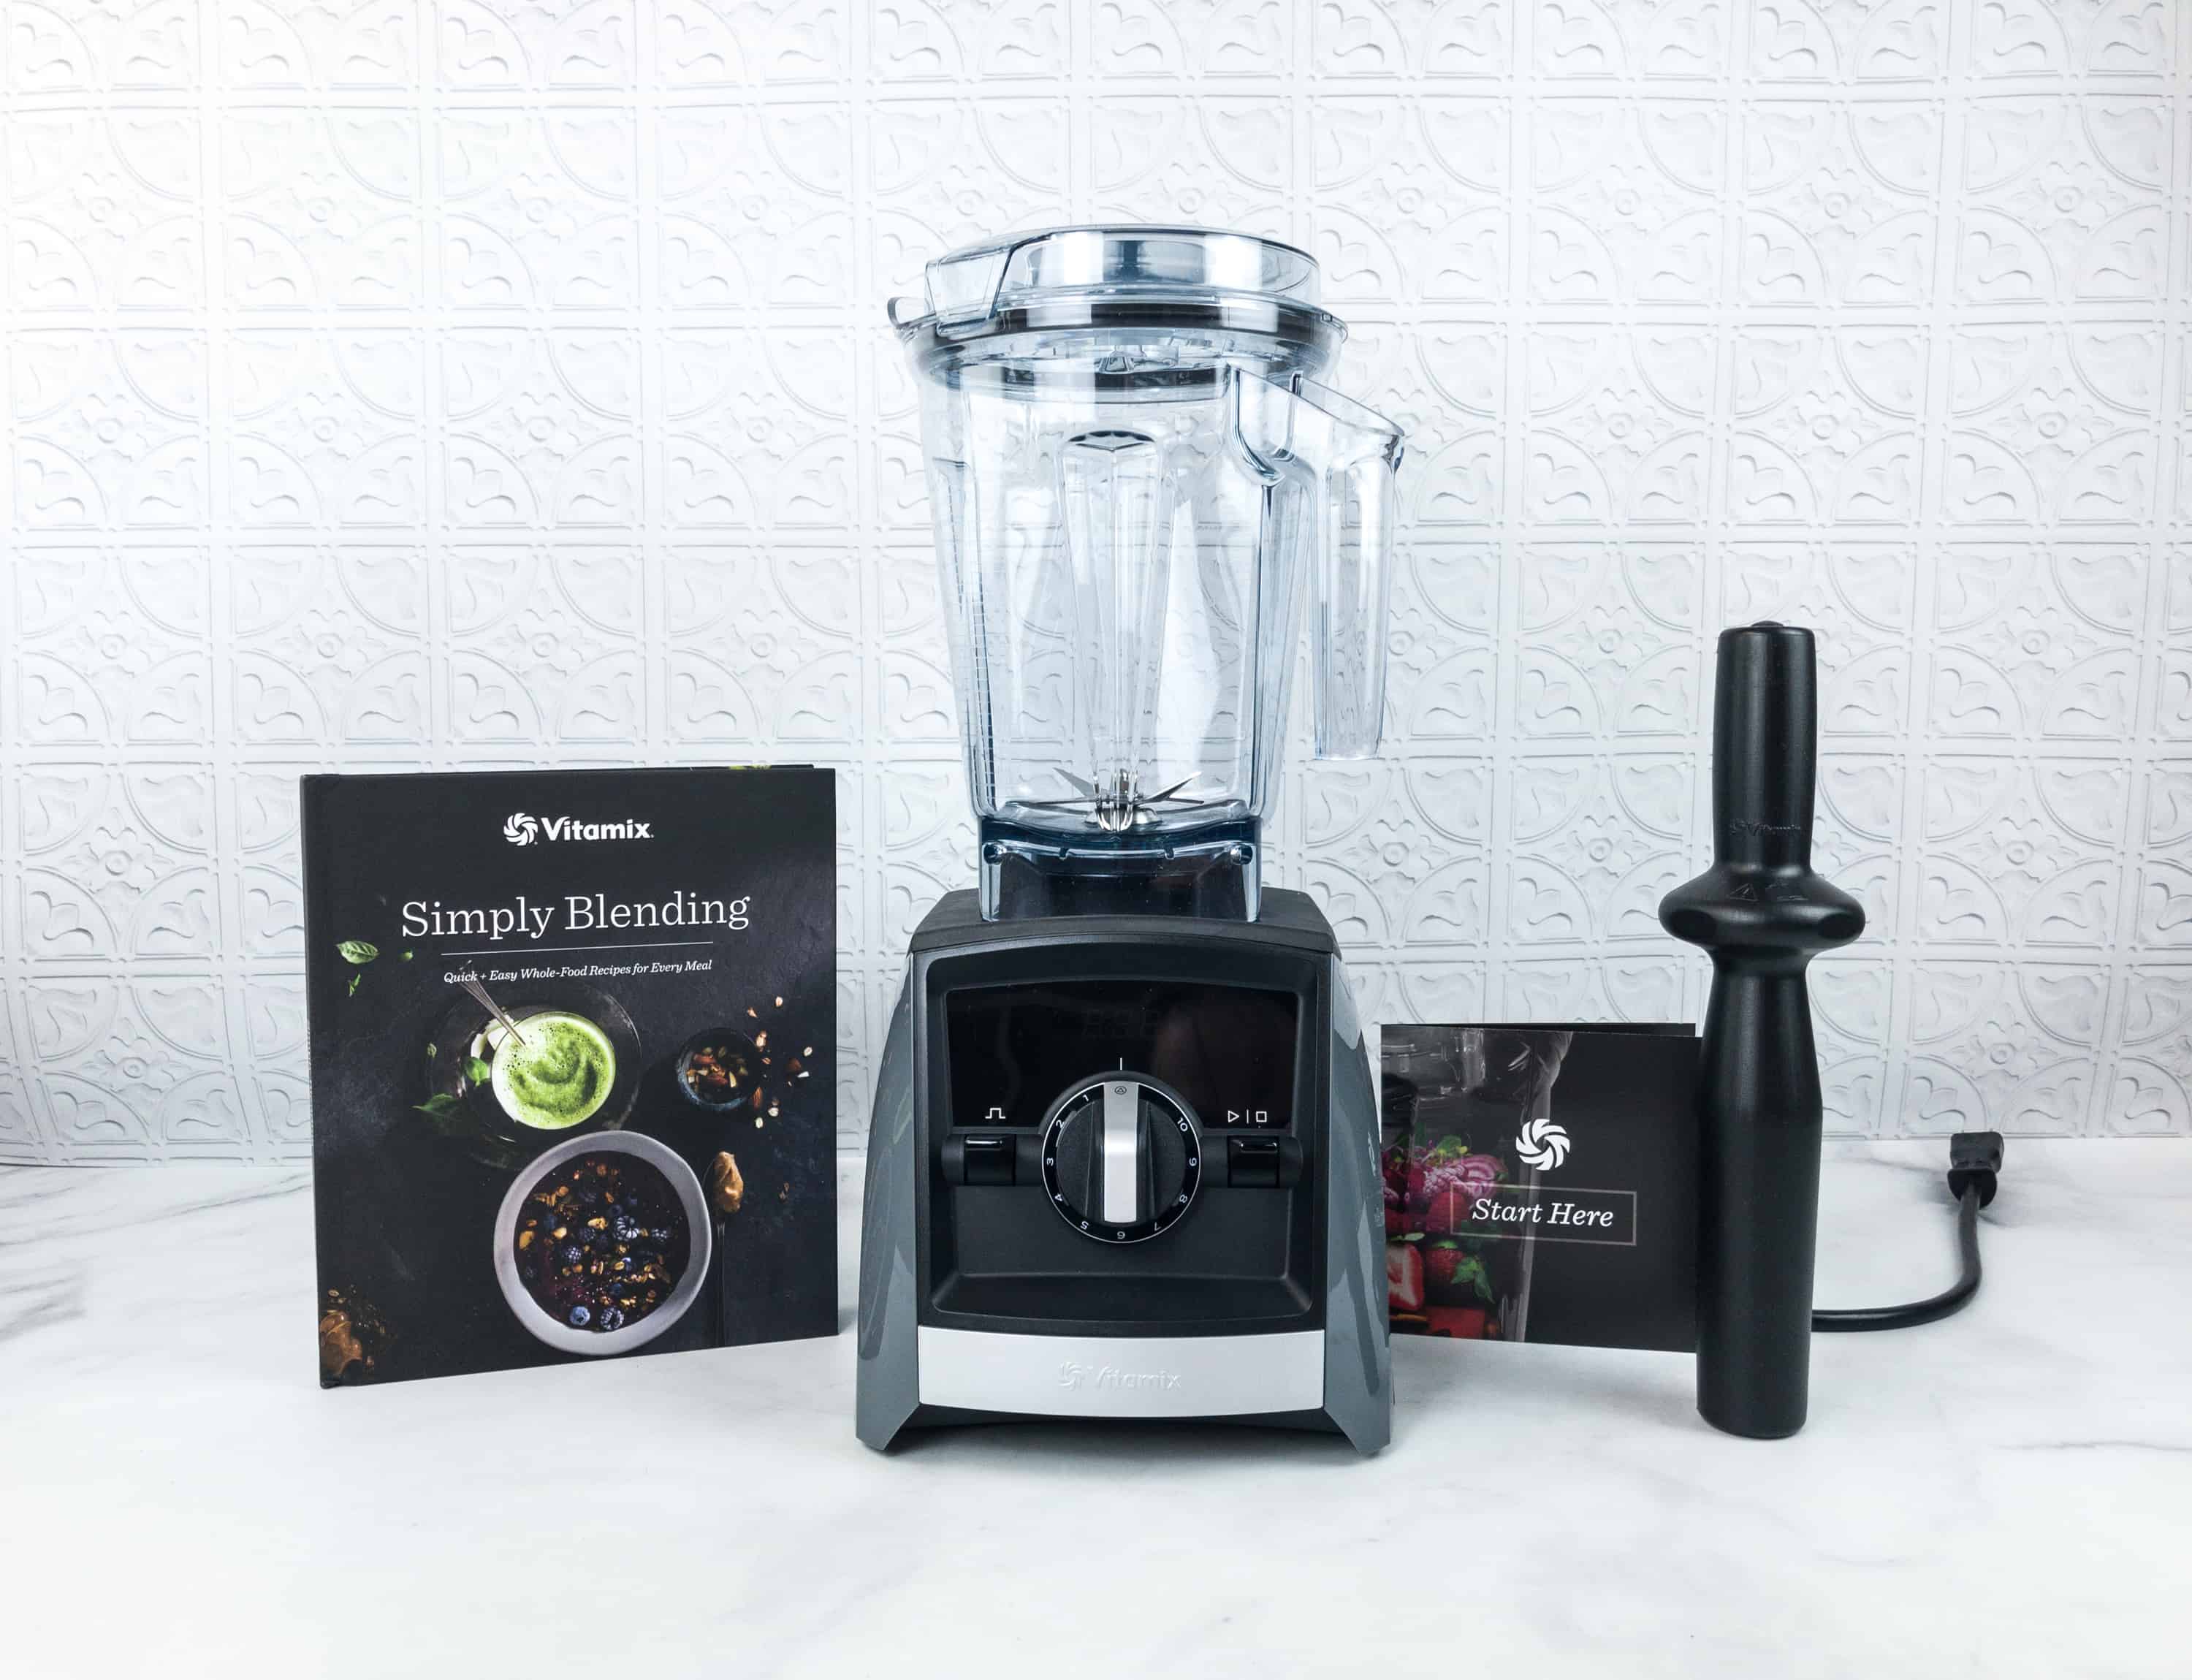 https://hellosubscription.com/wp-content/uploads/2018/05/10083446/vitamix-a2300-review-35.jpg?quality=90&strip=all